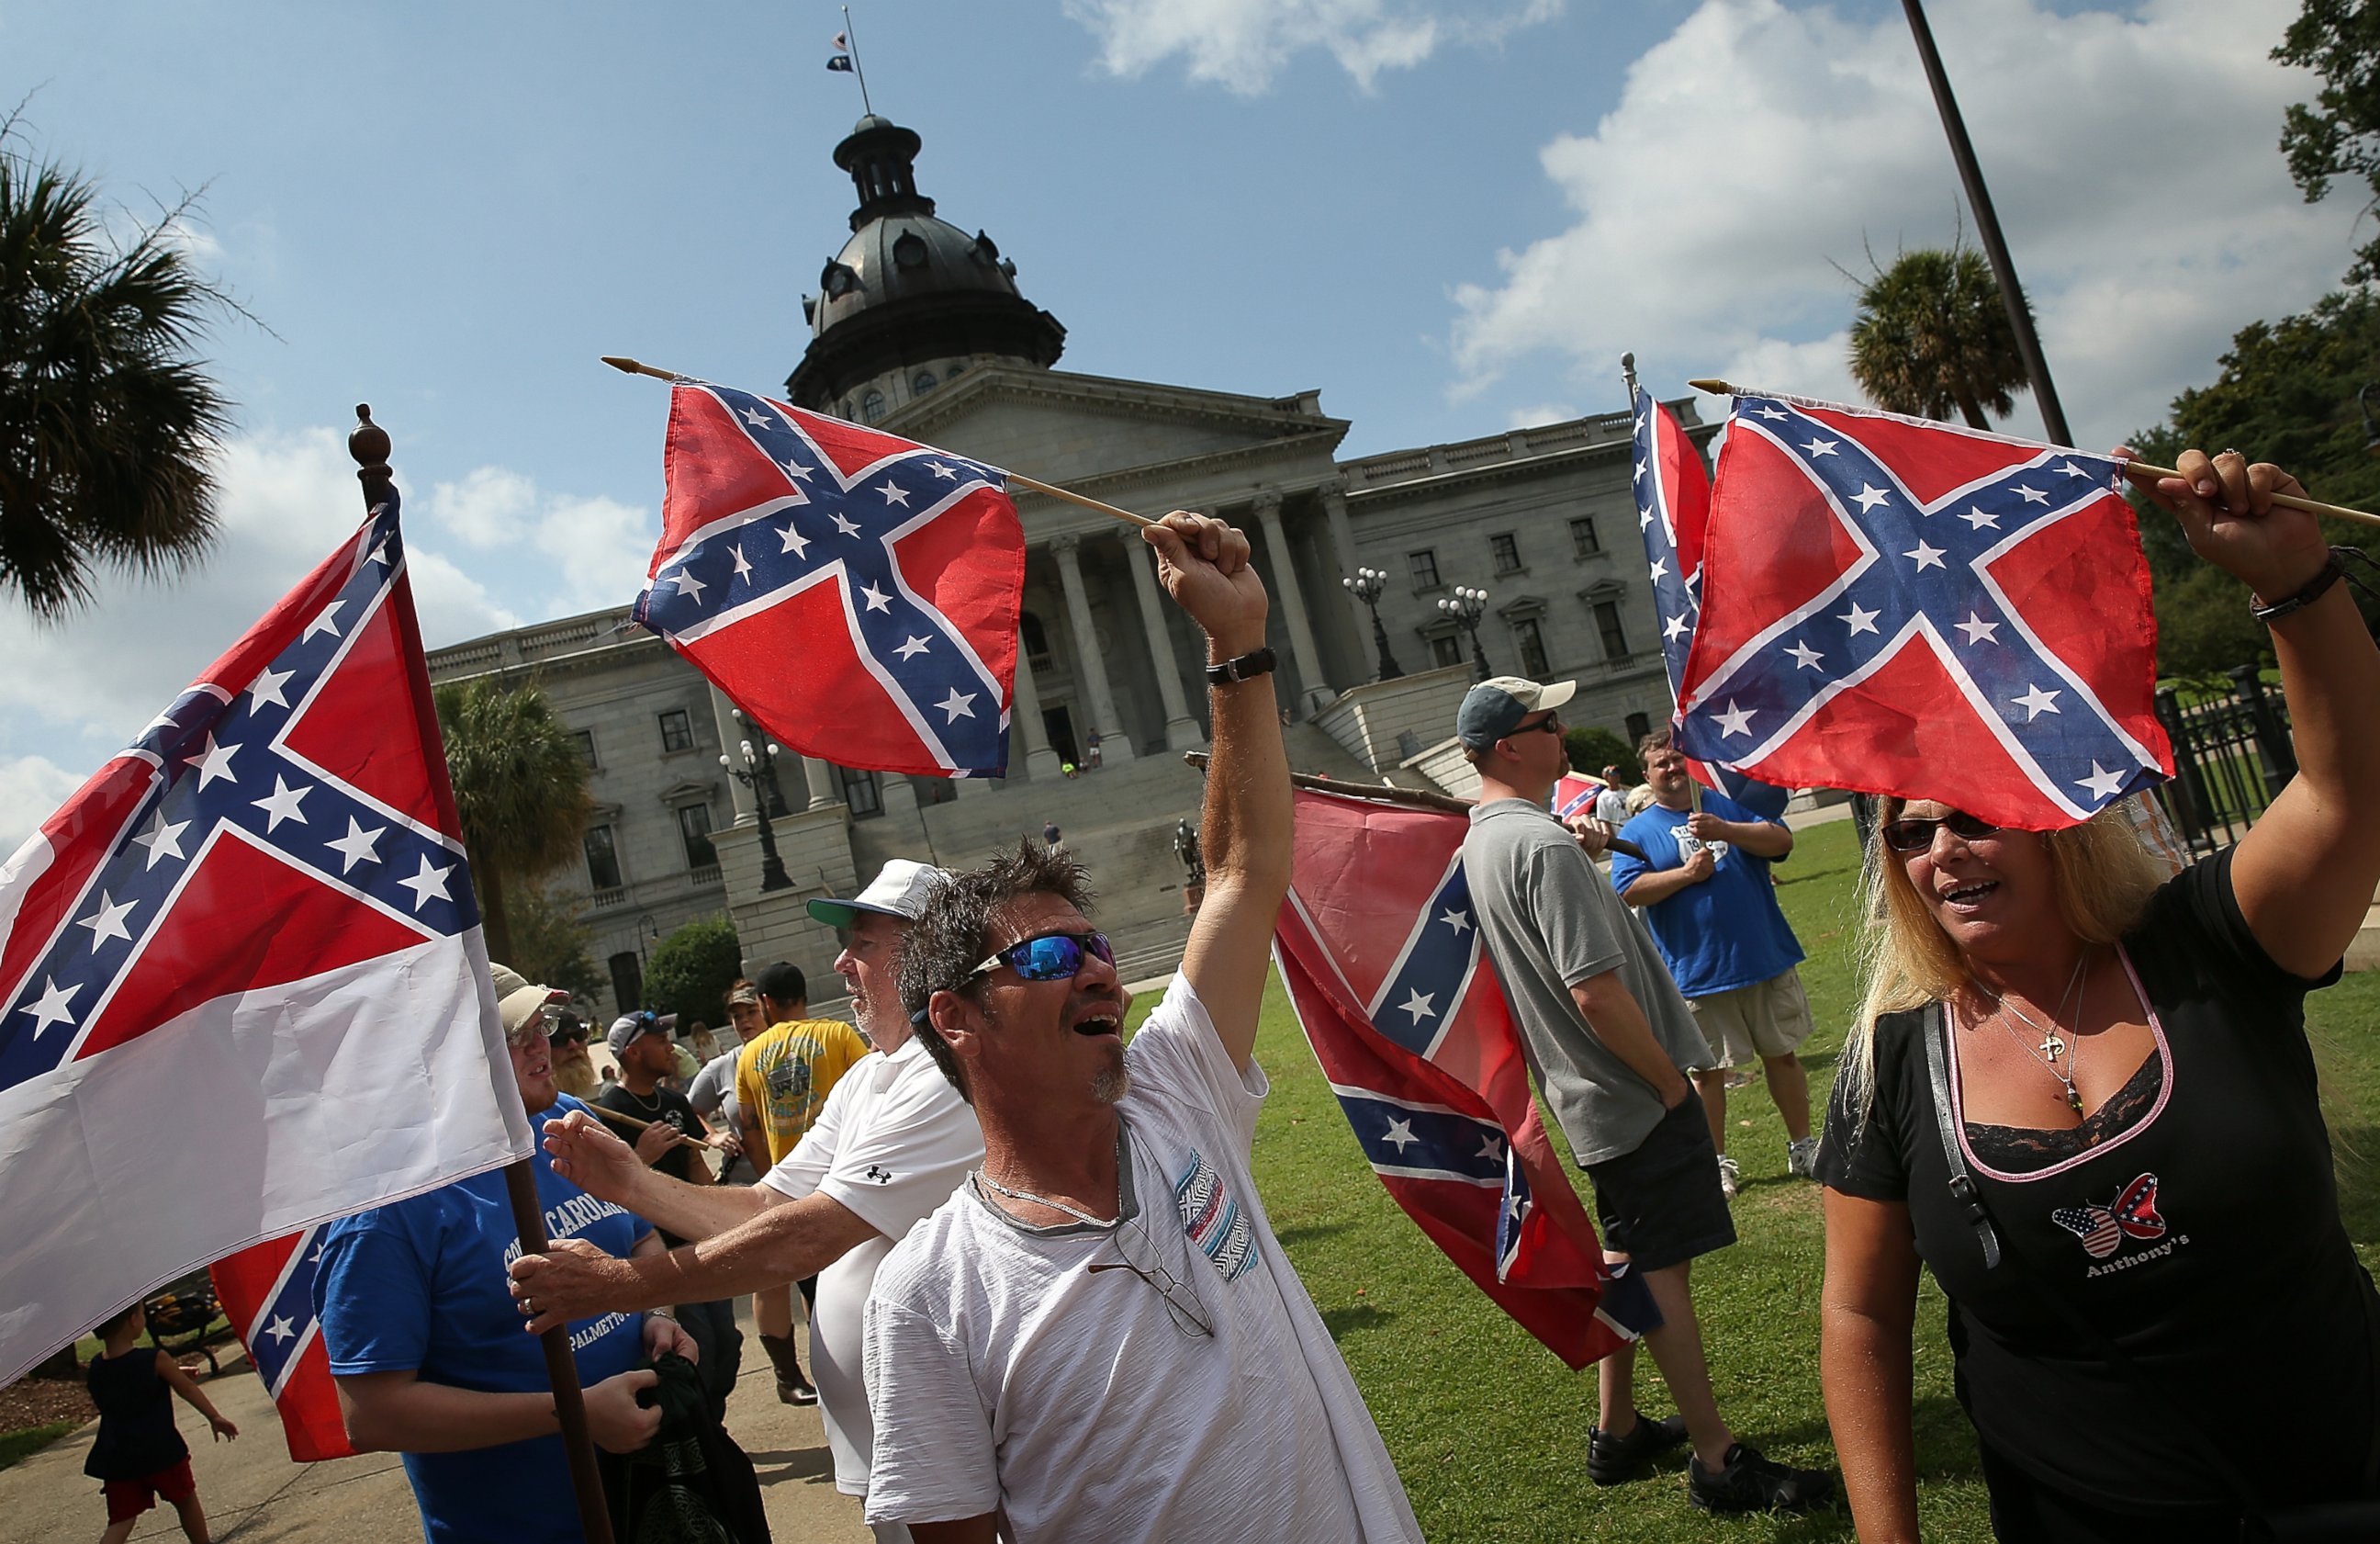 PHOTO: Demonstrators protest at the South Carolina State House calling for the Confederate flag to remain on the State House grounds, June 27, 2015 in Columbia, S.C.